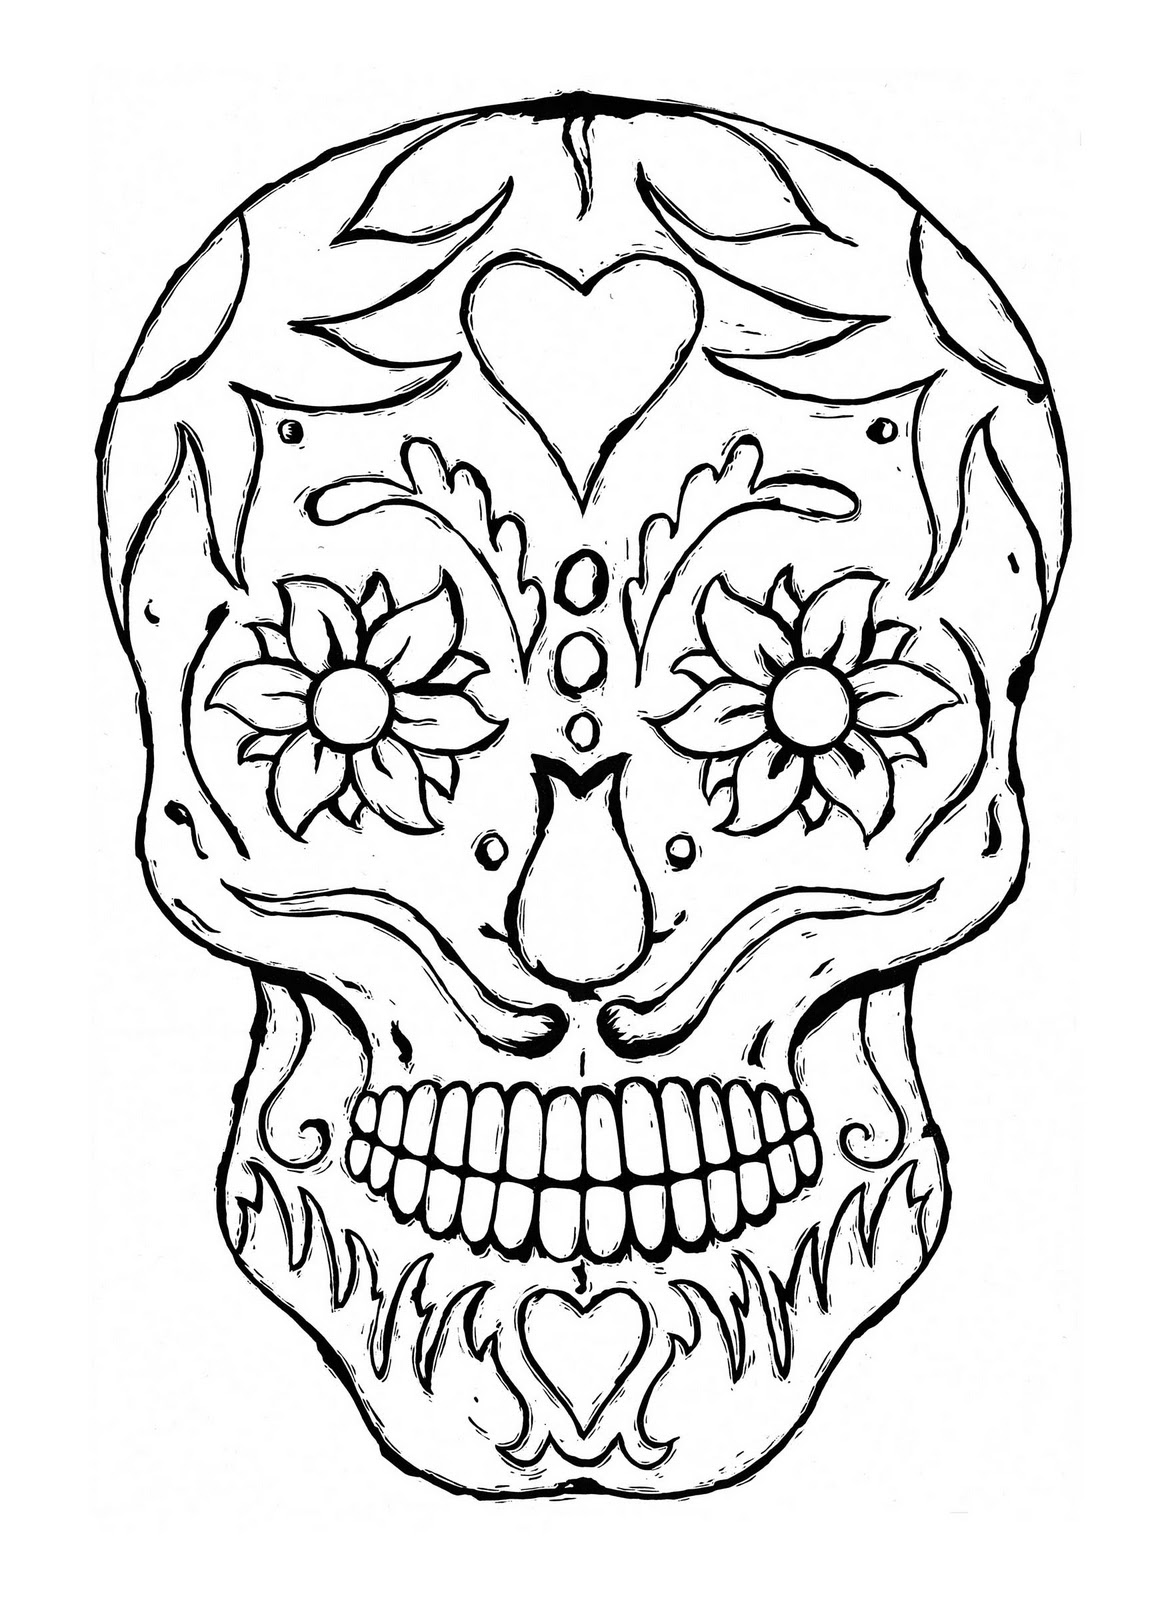 Skull Coloring Pages For Kids 1